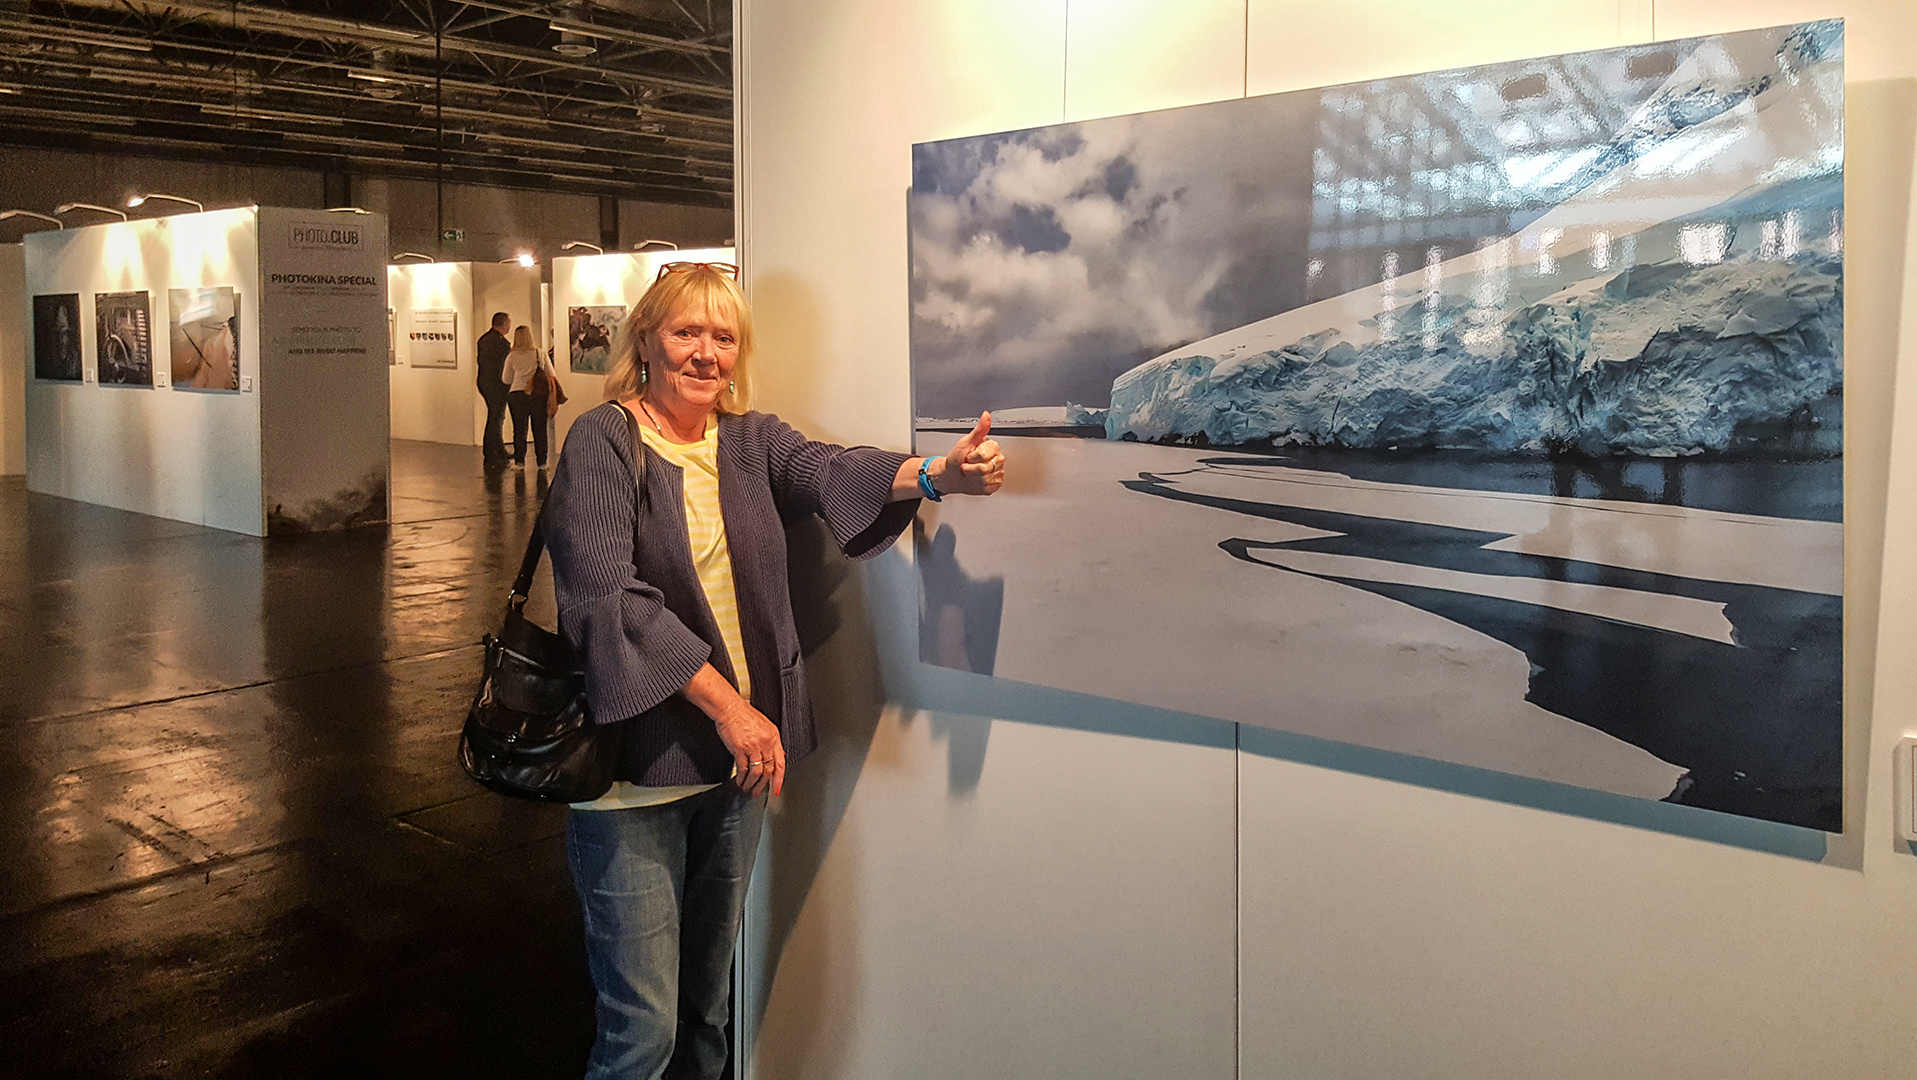 my picture "Lemaire Channel" exposed at Photokina